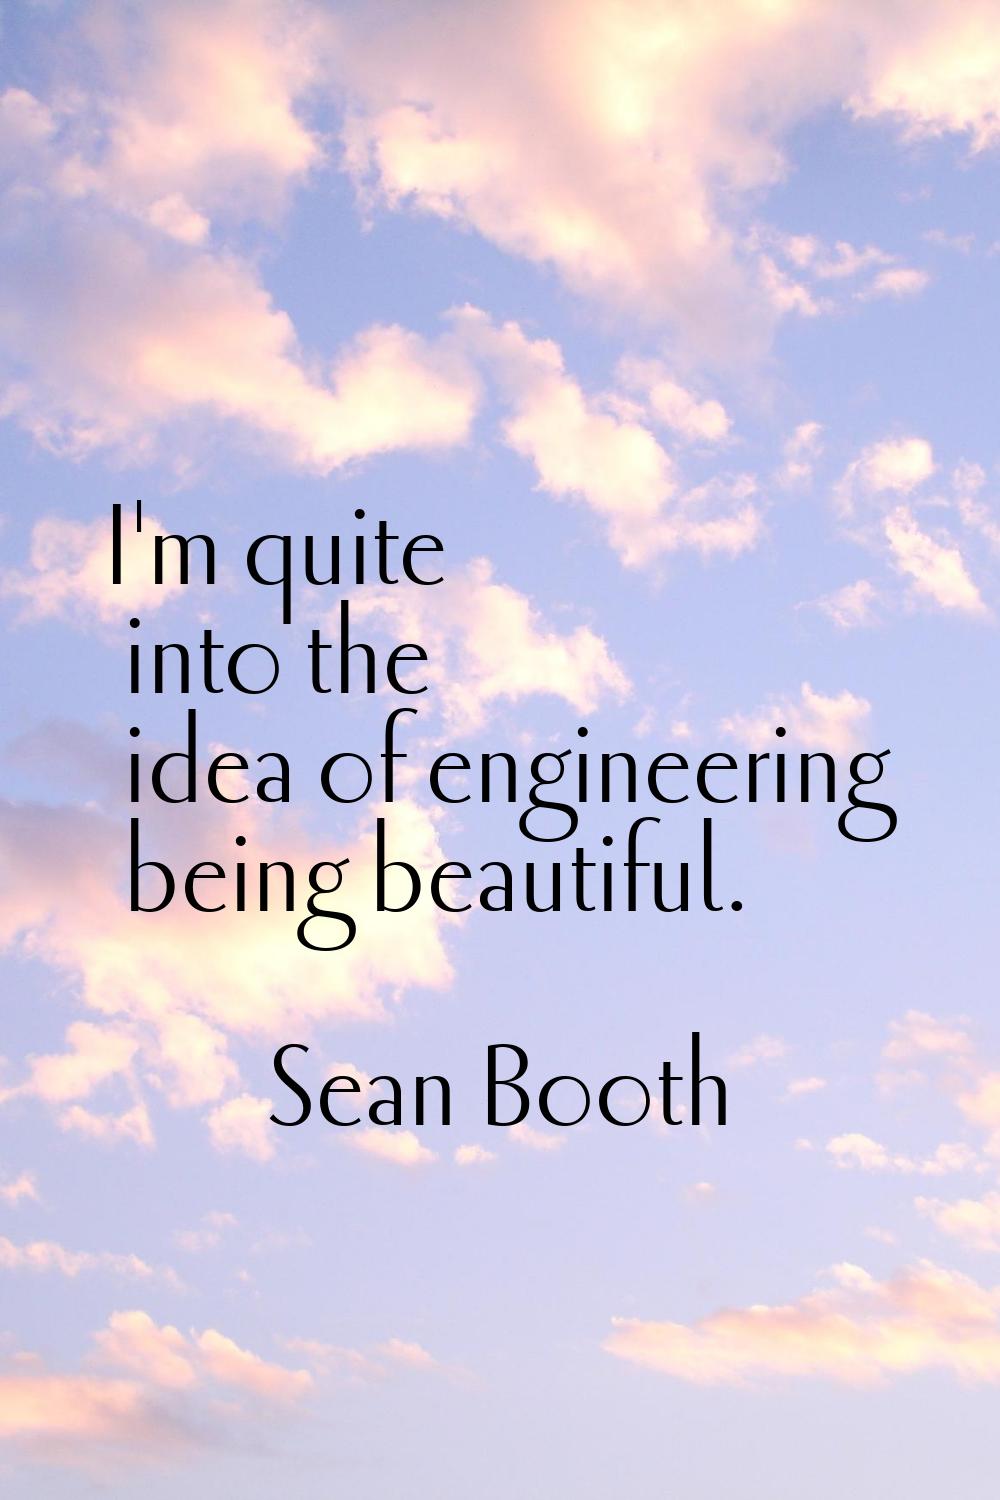 I'm quite into the idea of engineering being beautiful.